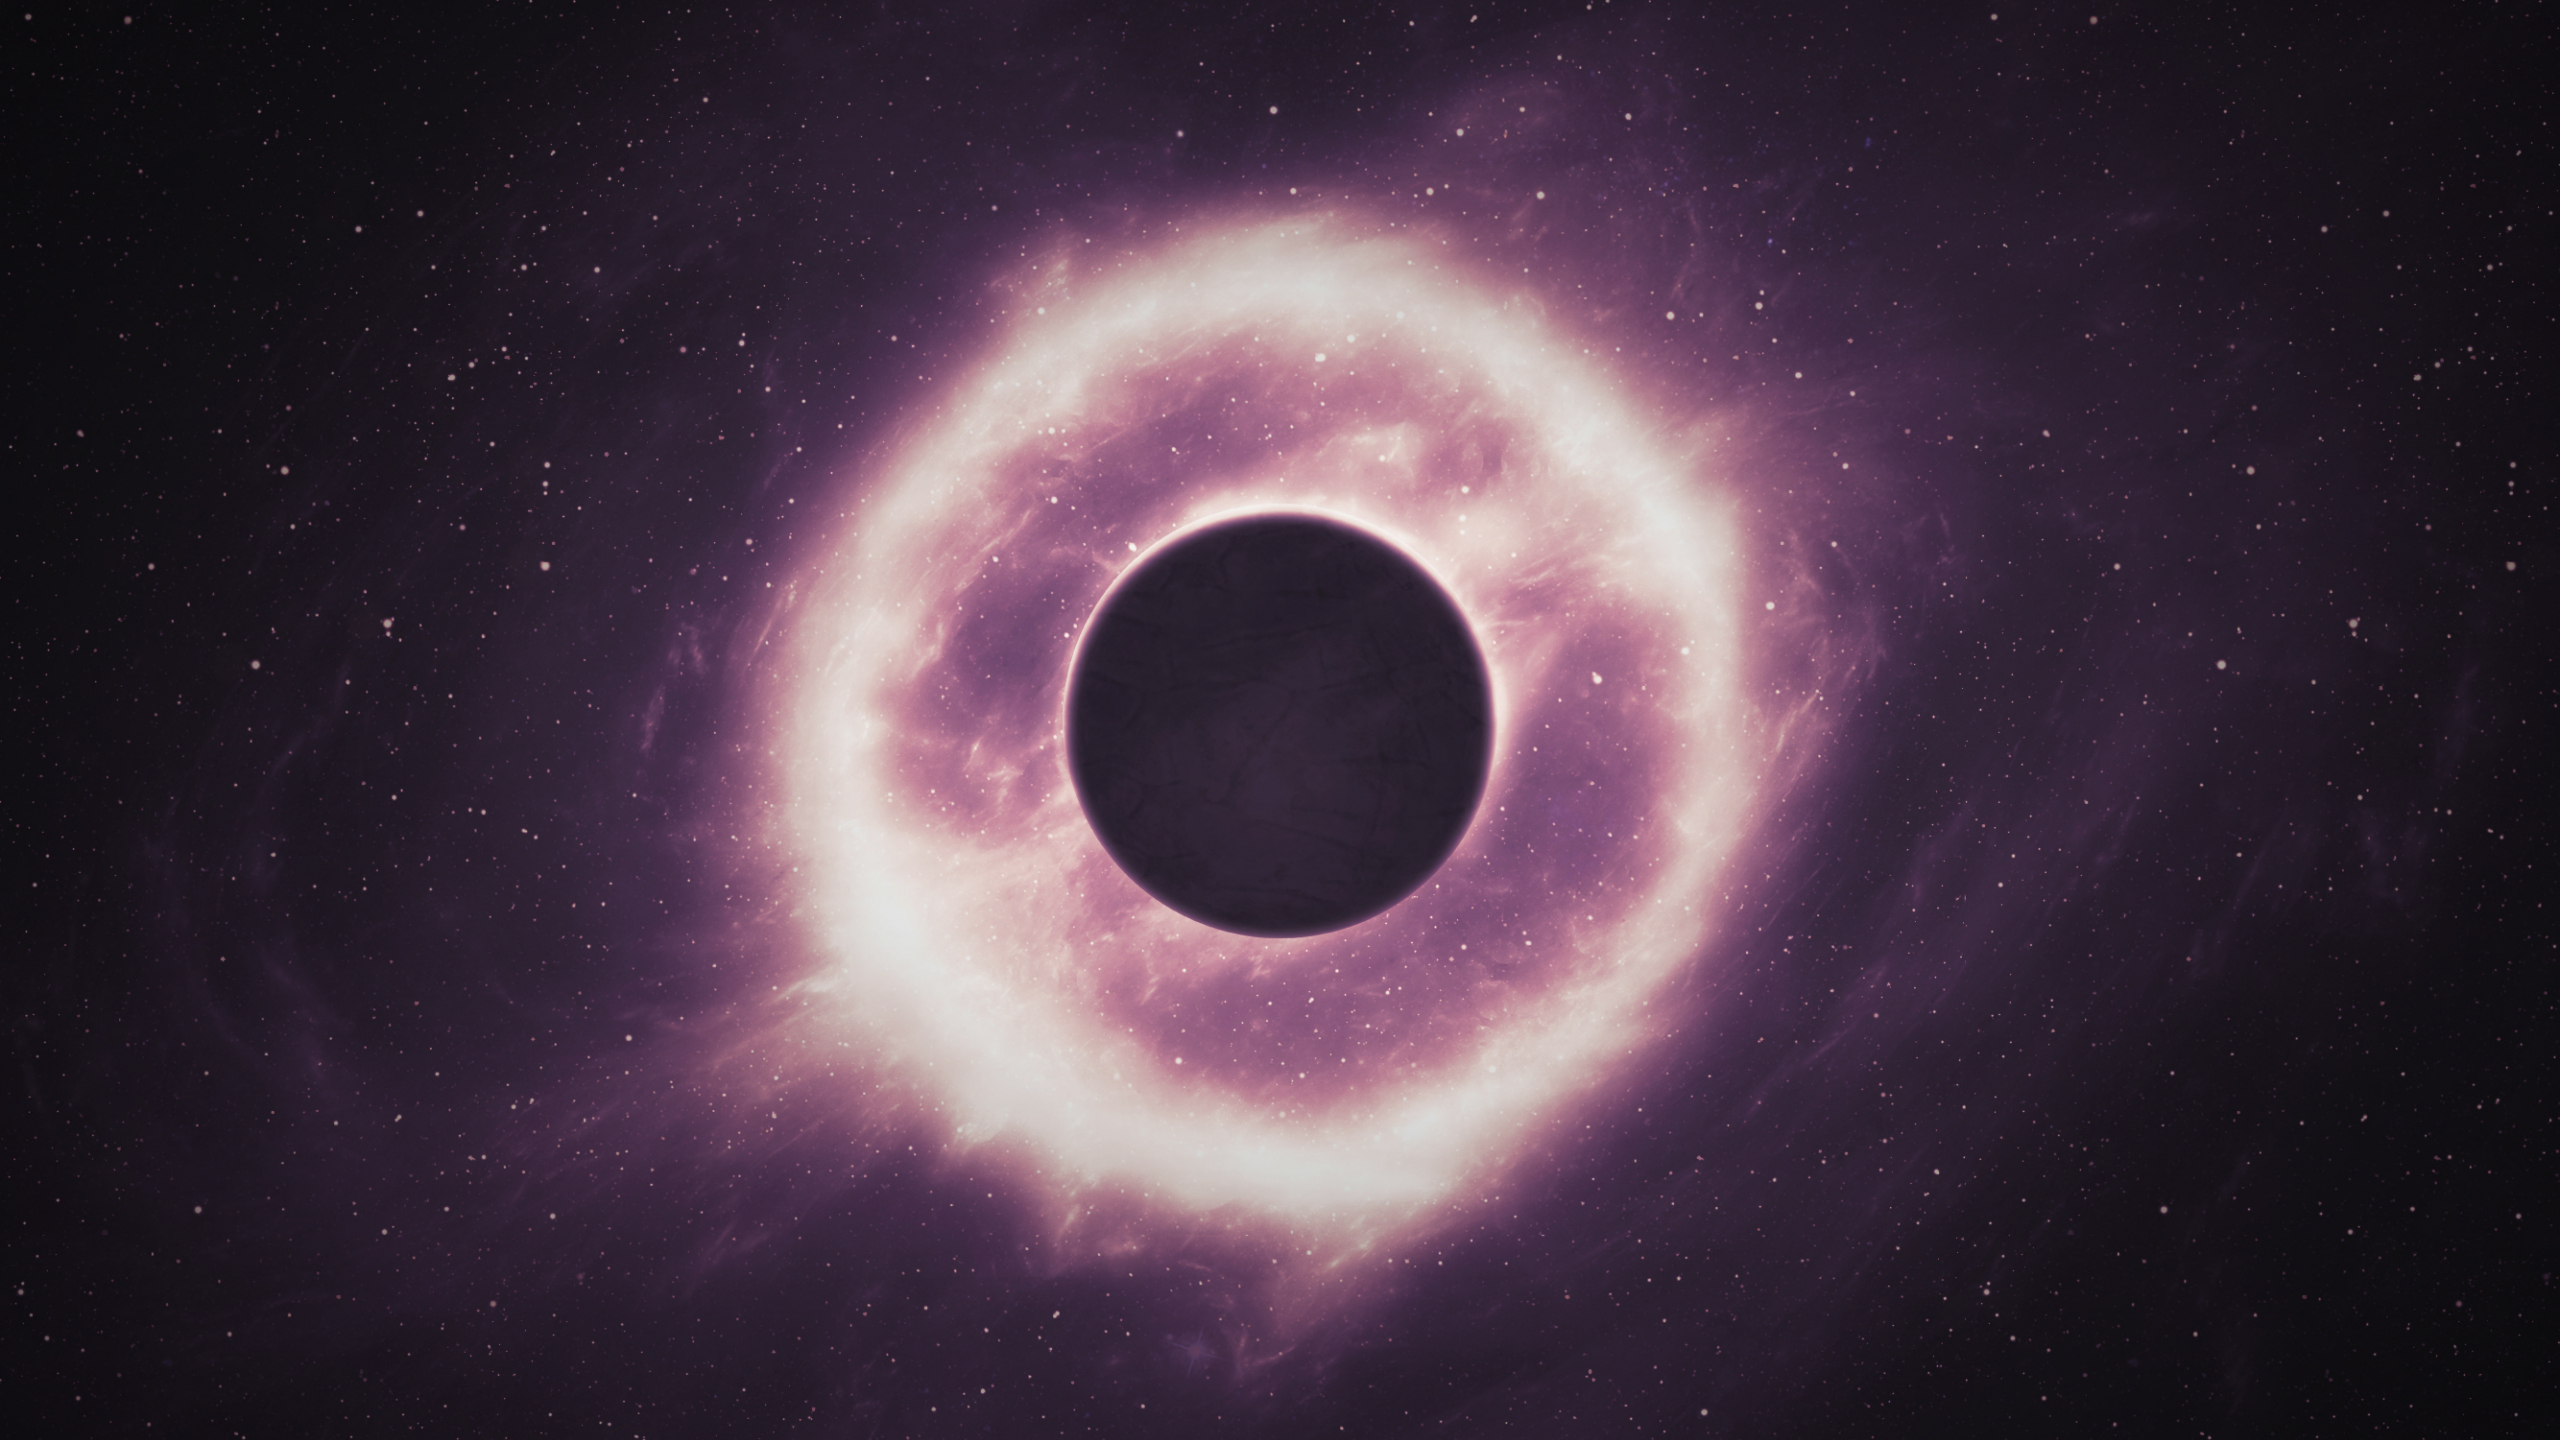 Download wallpaper 2560x1440 planet, space, black hole, violet space, dual wide 16:9 2560x1440 HD background, 24457